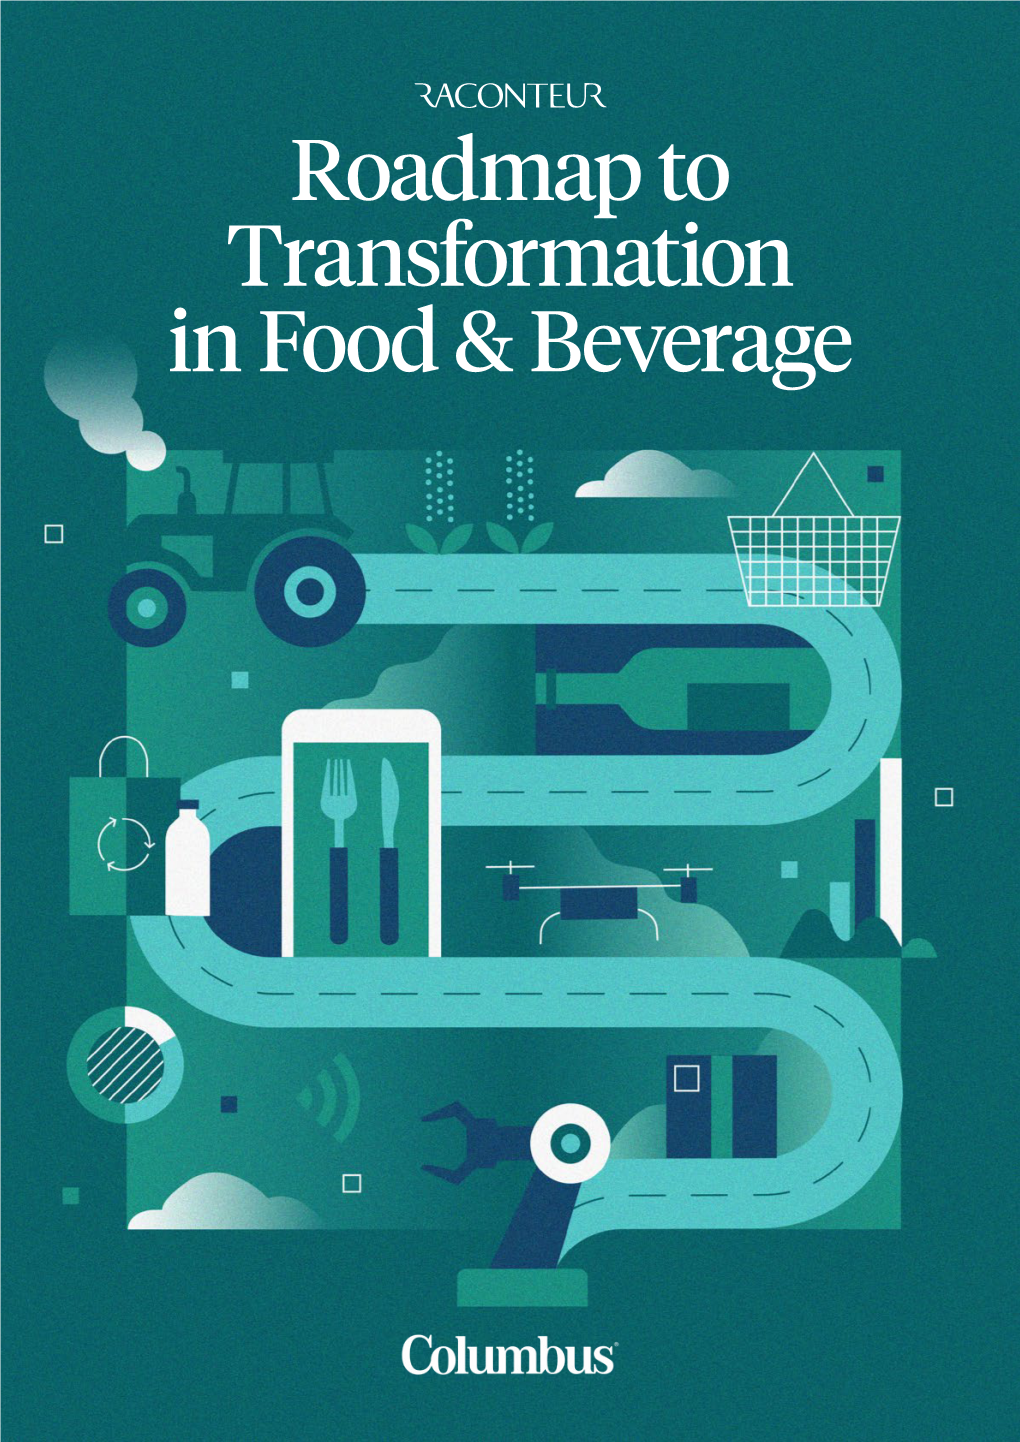 Roadmap to Transformation in Food & Beverage